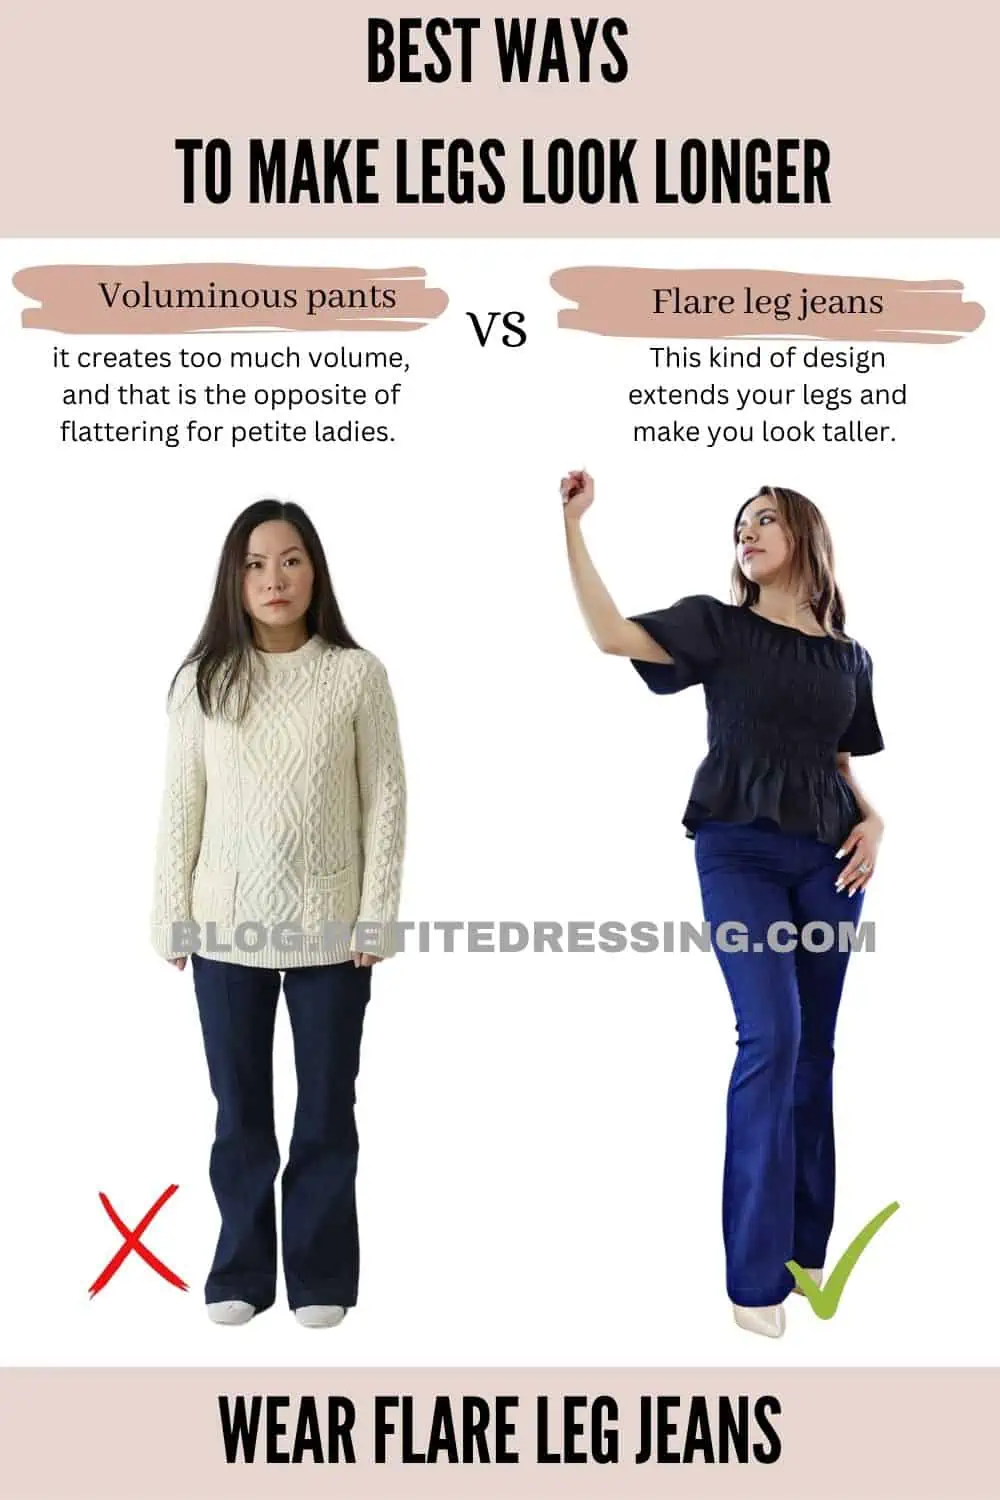 Petite fashion and petite styling tips to make your proportion look better  and legs look longer. #…